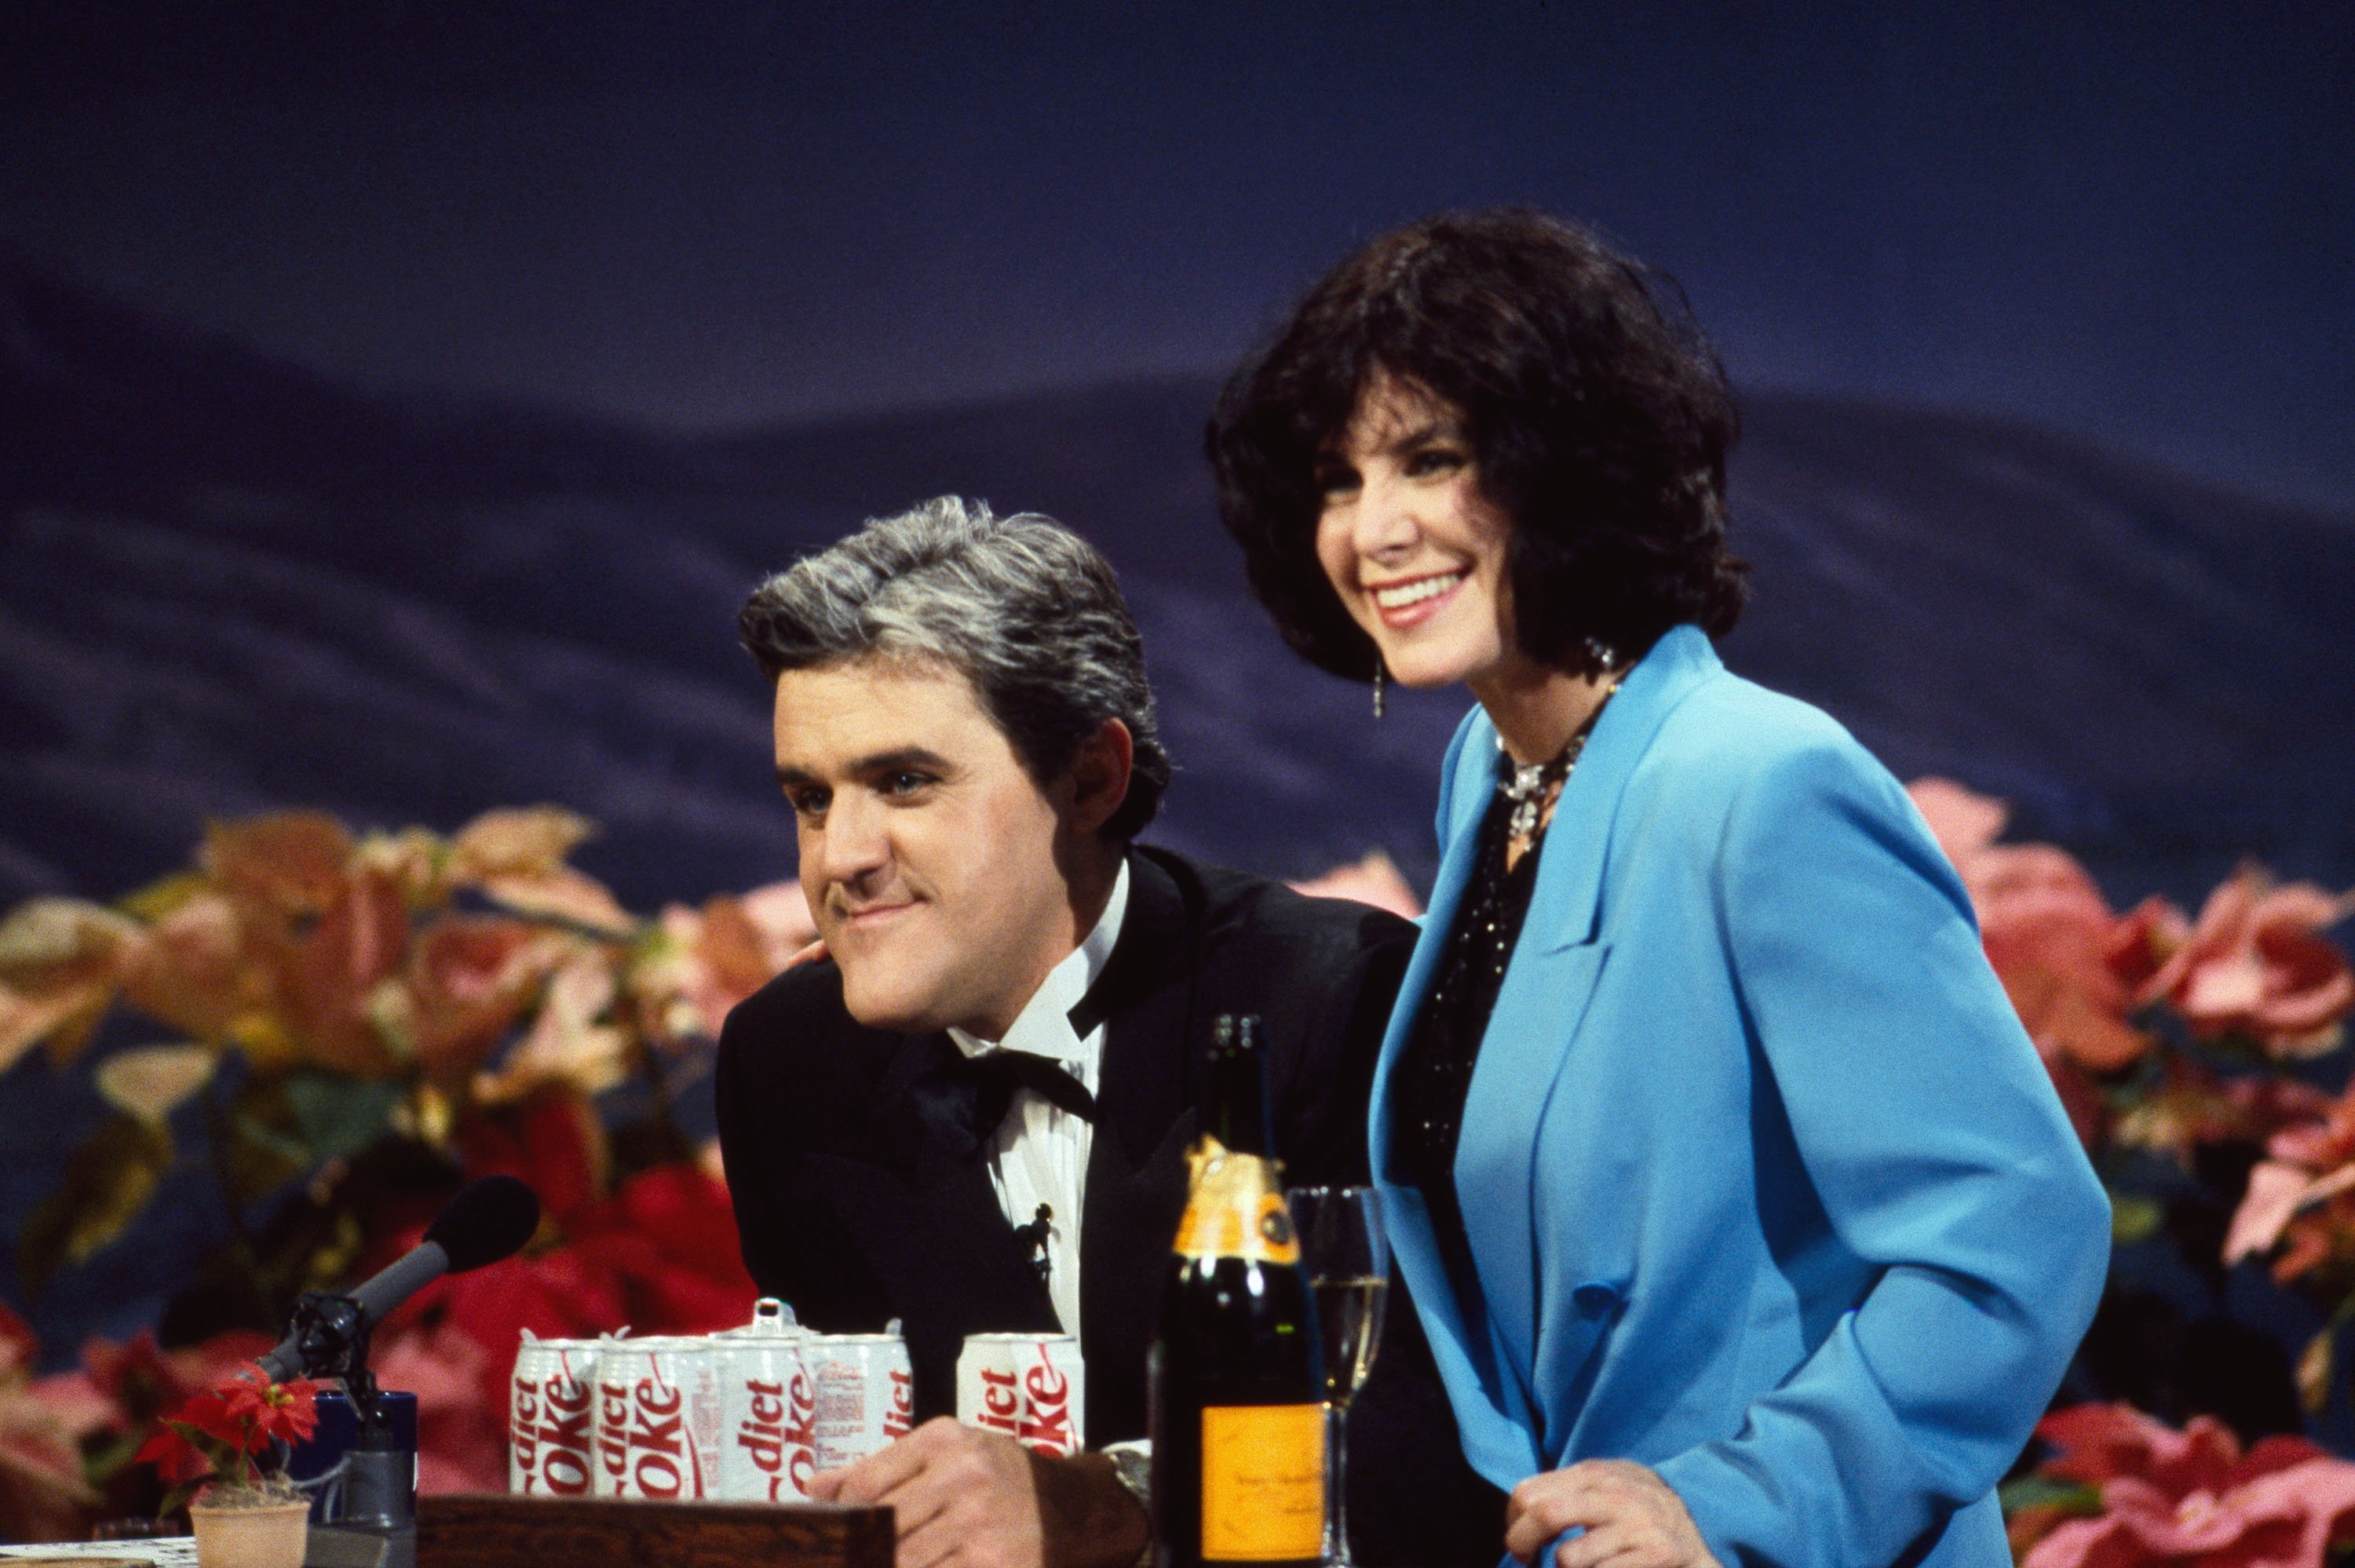 Jay and Mavis Leno on "The Tonight Show with Jay Leno" on December 31, 1992. | Source: Getty Images